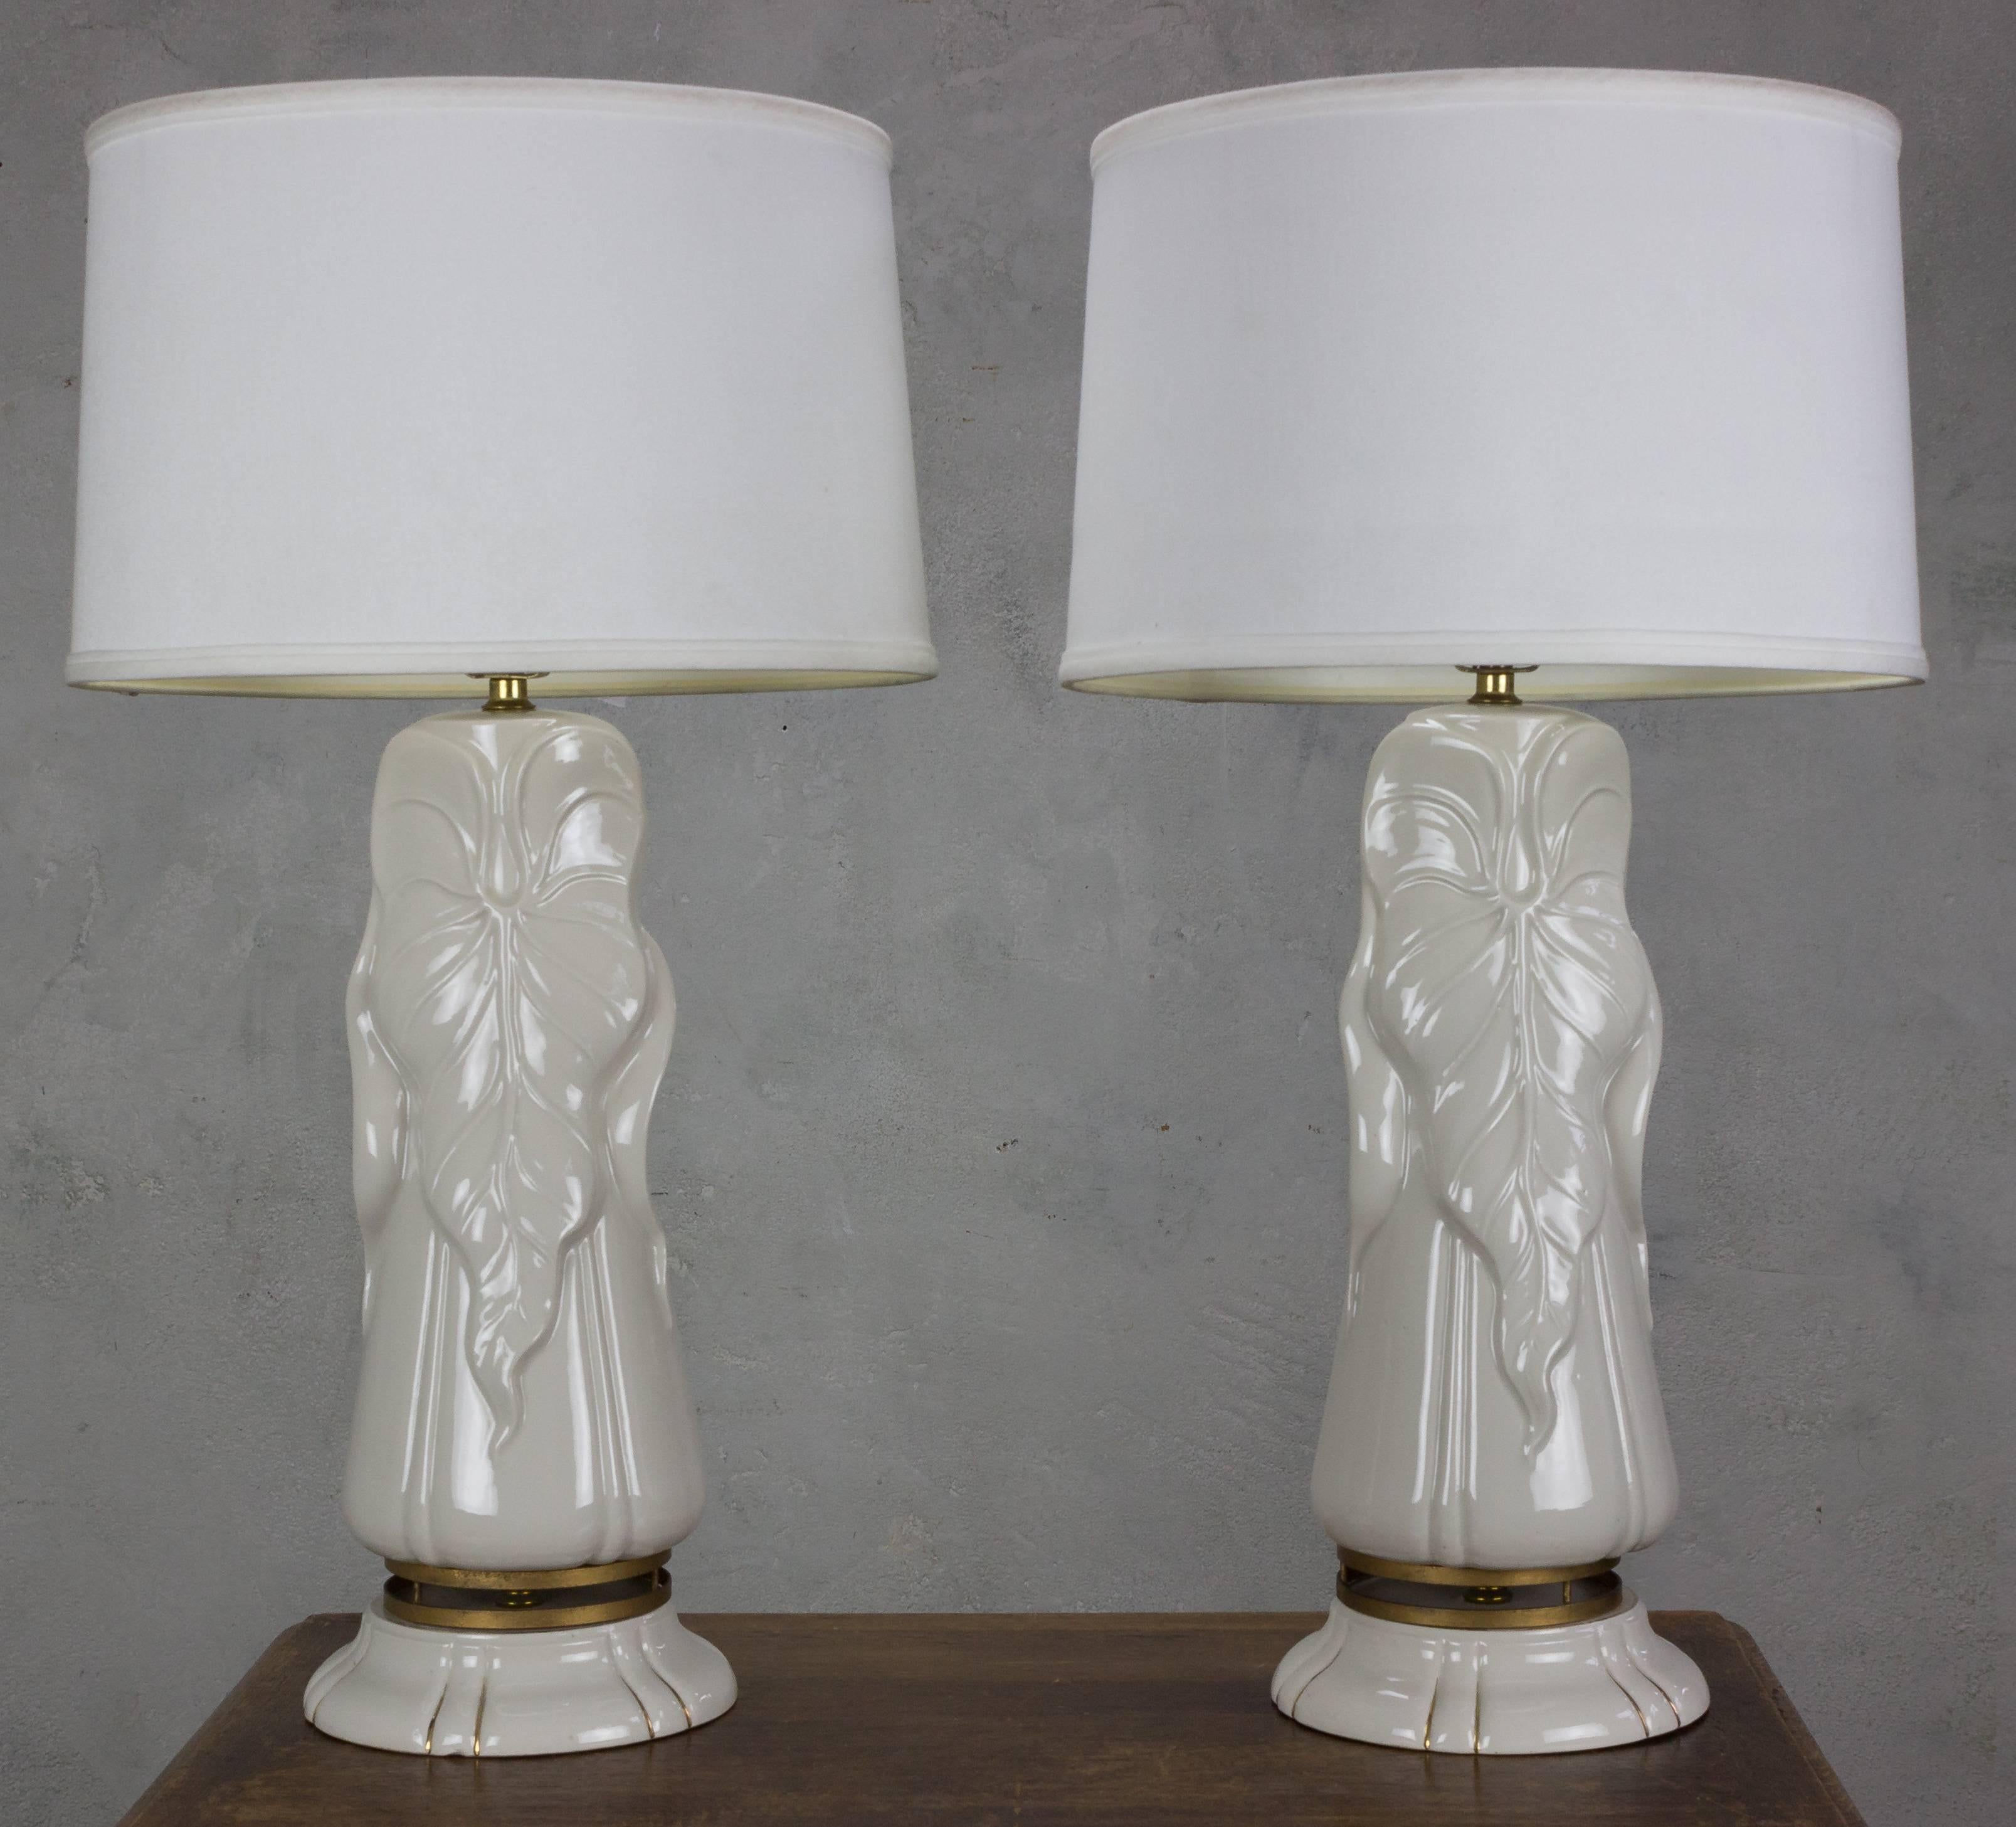 These 1940s American Hollywood Glam white ceramic lamps embody the glamour and elegance of old Hollywood. These vintage treasures are in very good vintage condition, preserving their allure from decades past. The white ceramic bodies, meticulously